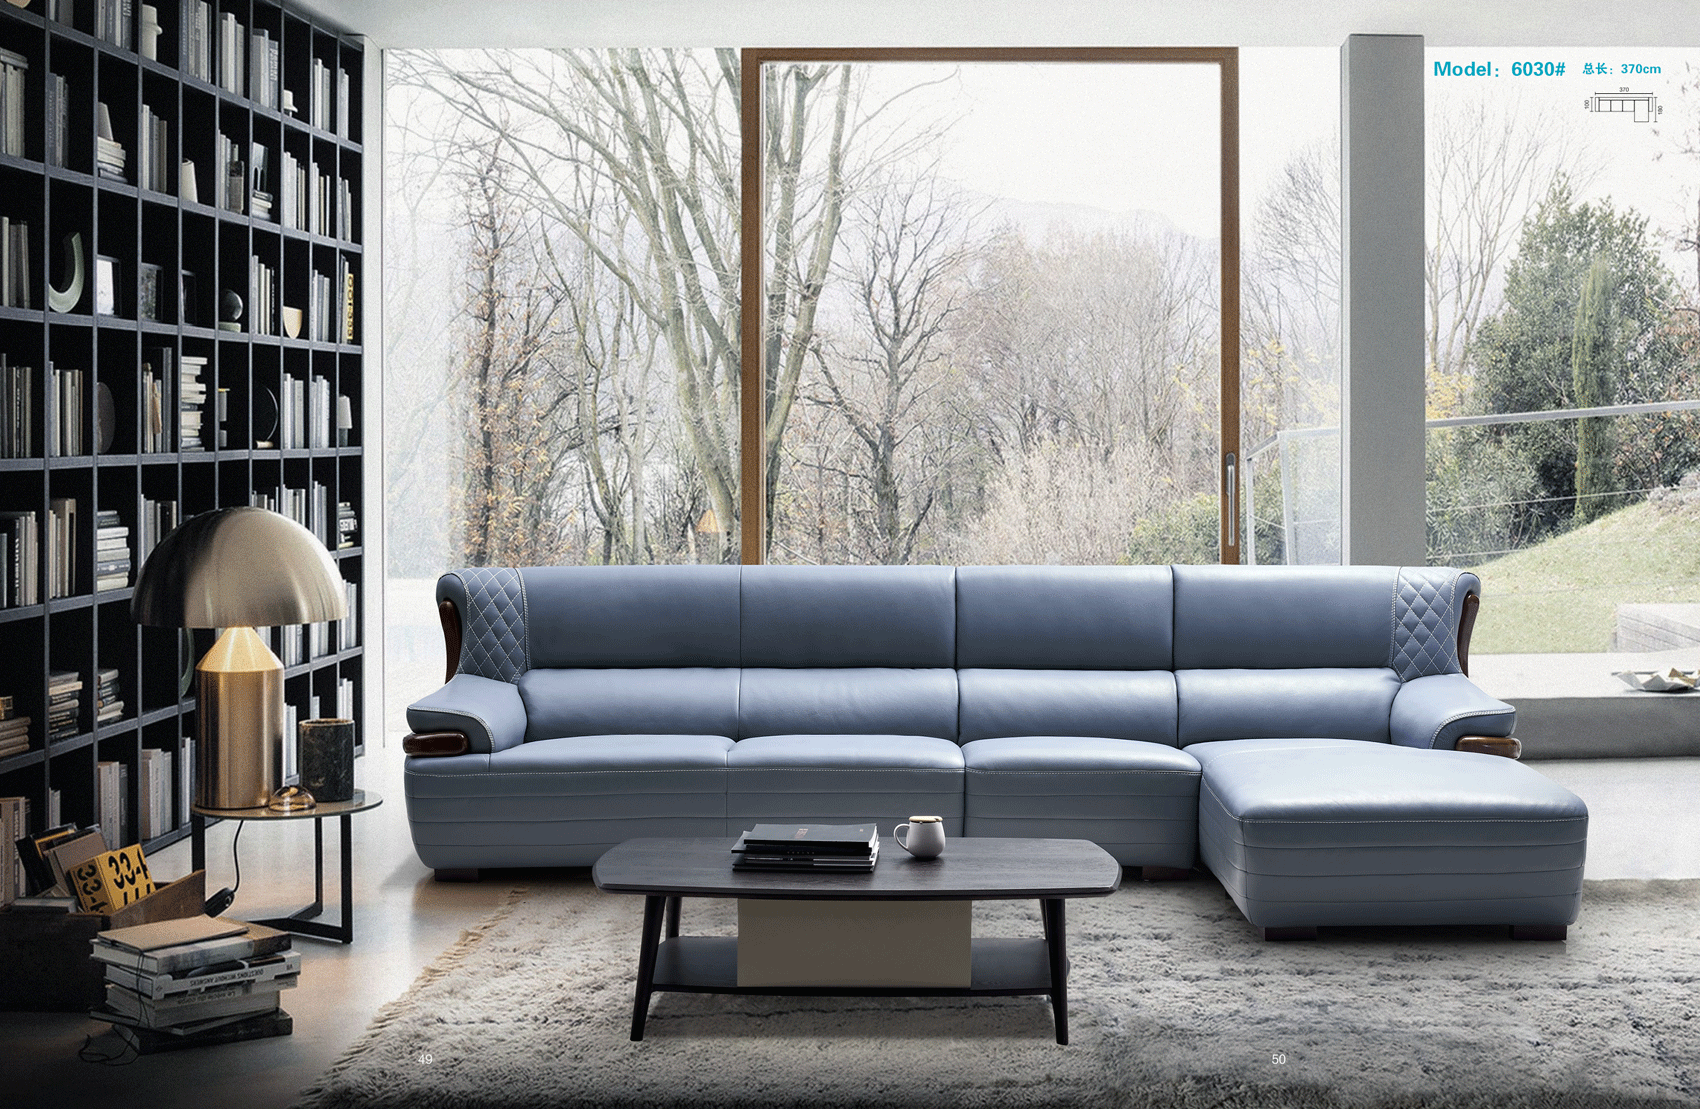 Brands ALF Capri Coffee Tables, Italy 6030 Sectional